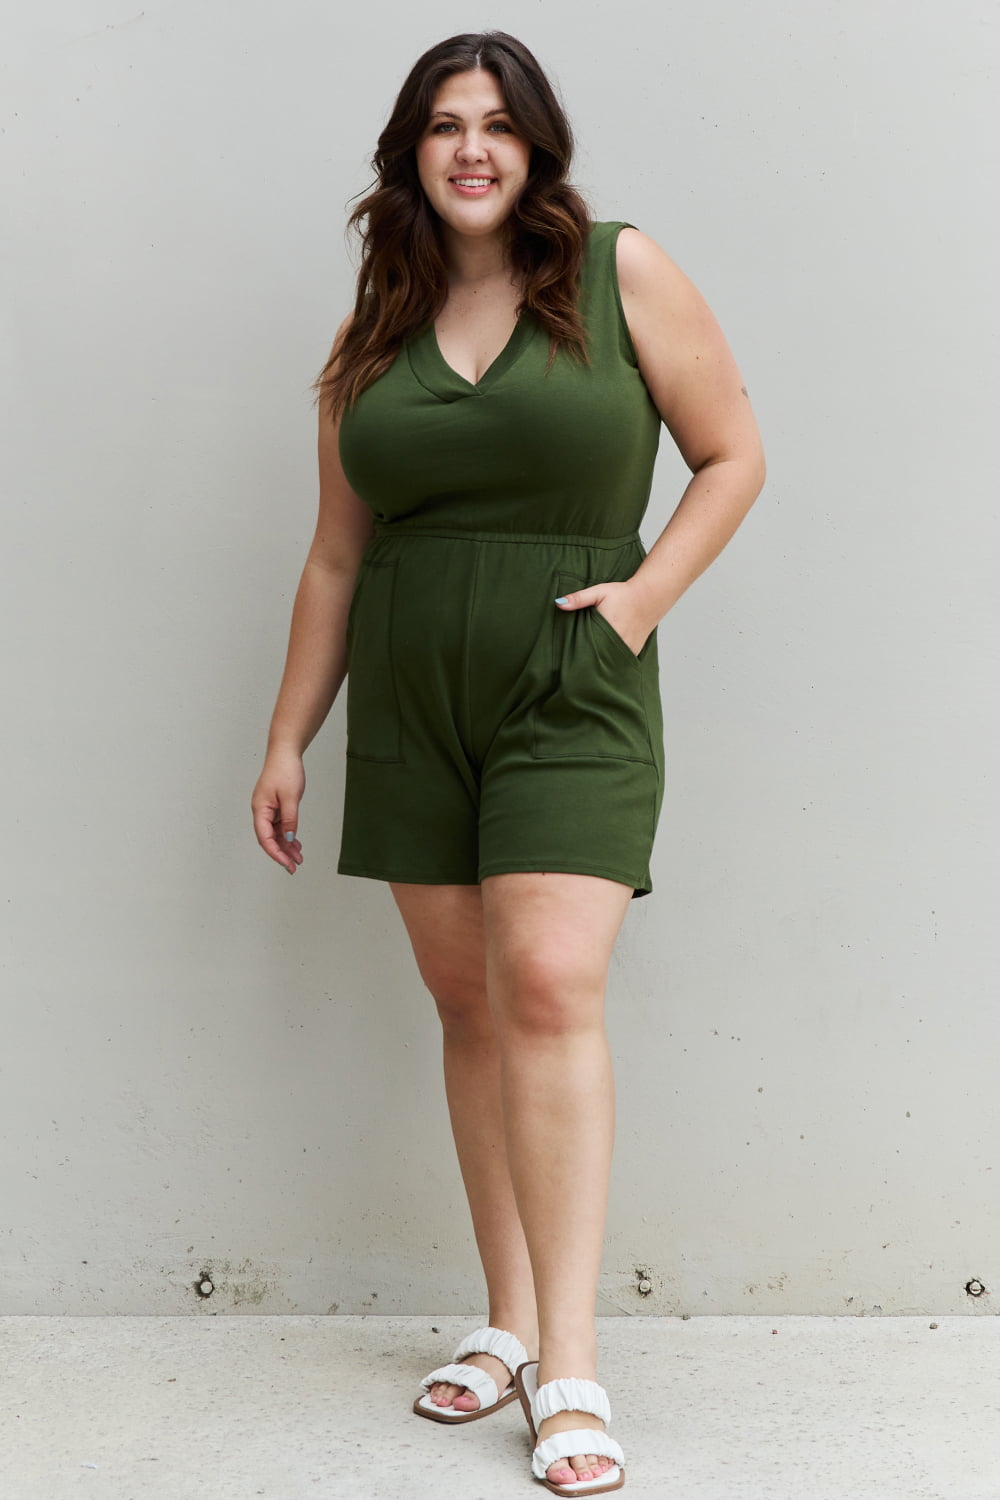 Zenana Forever Yours Full Size V-Neck Sleeveless Romper in Army Green-Jumpsuits-Inspired by Justeen-Women's Clothing Boutique in Chicago, Illinois